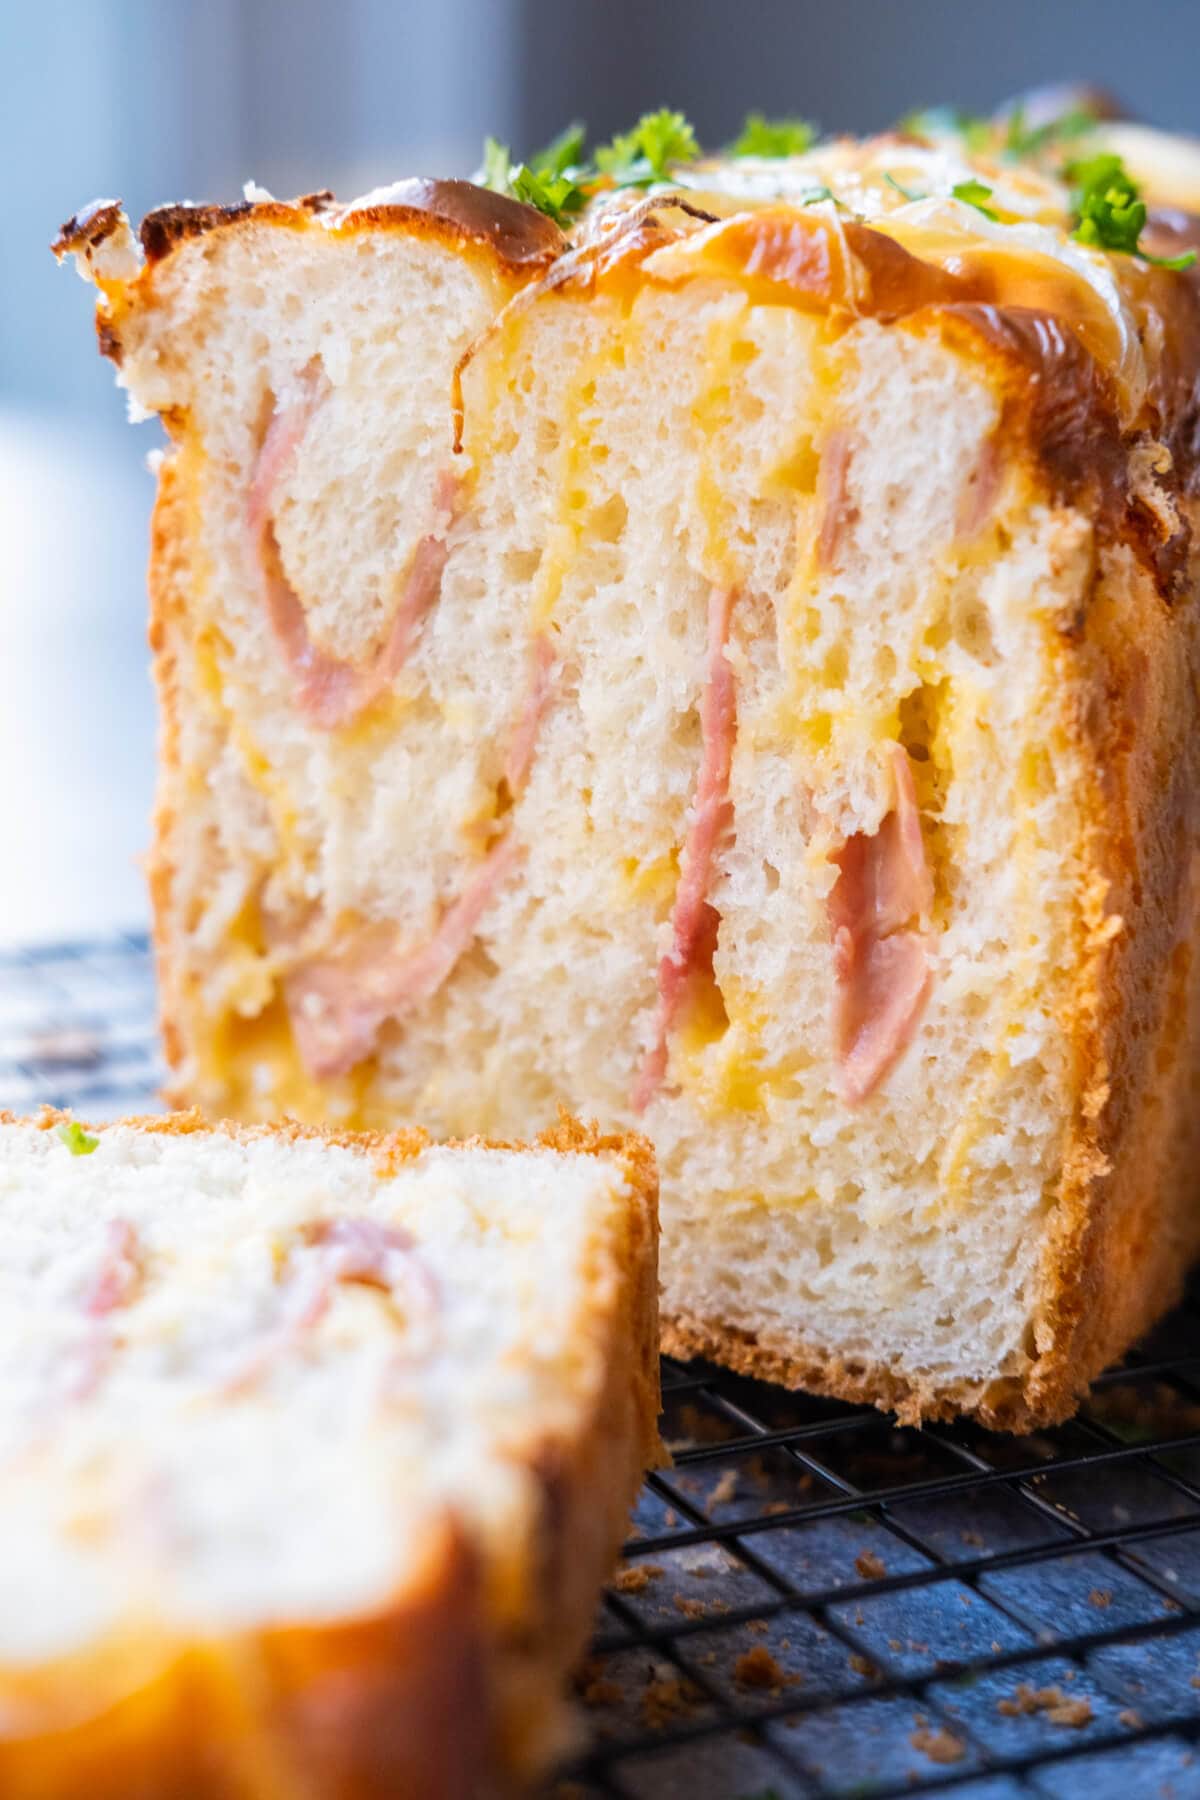 Ham and cheese loaf, sliced into pieces.